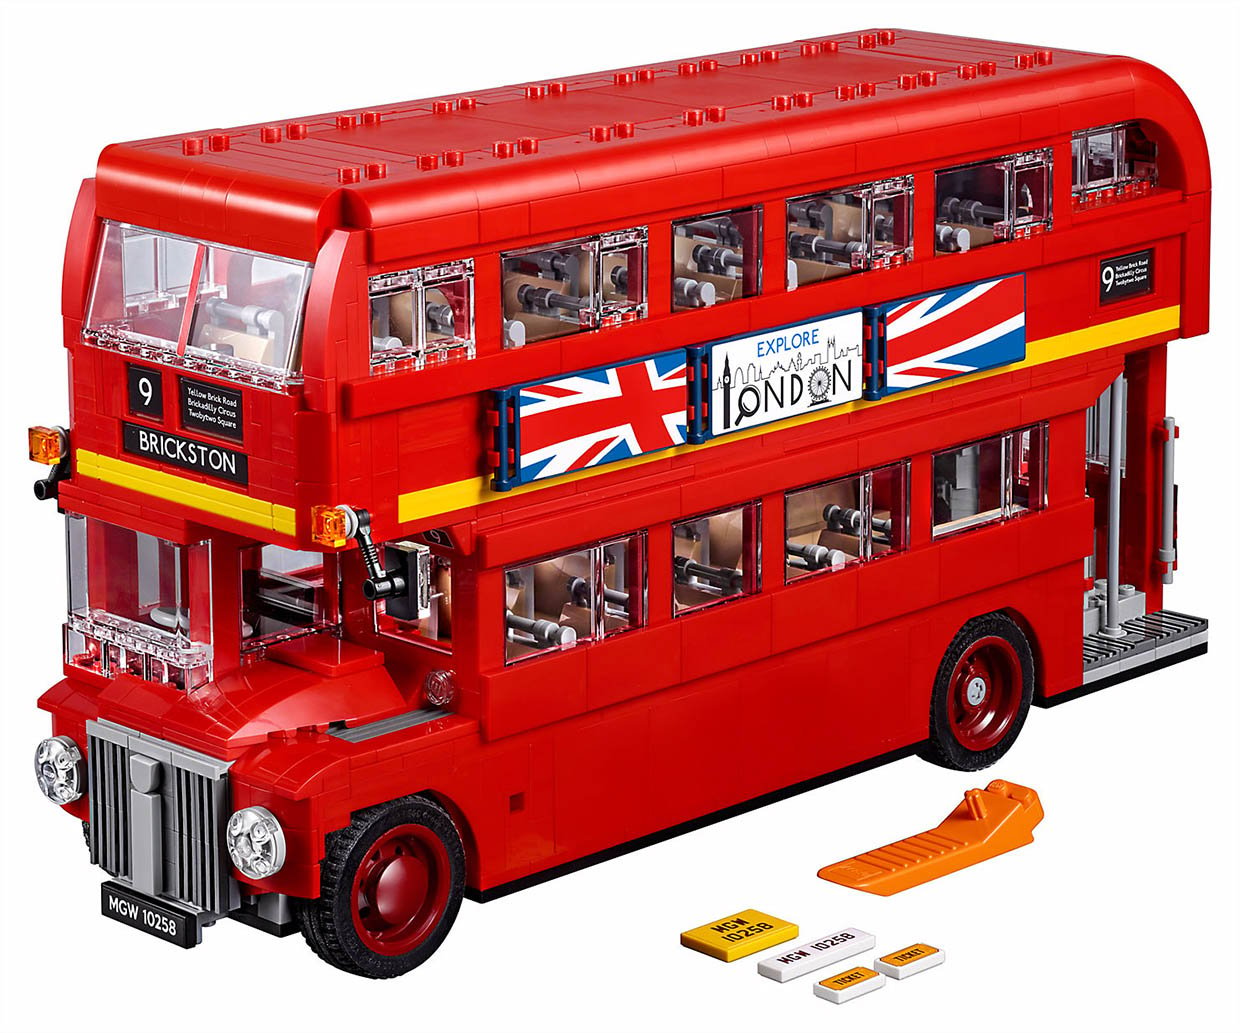 LEGO London Bus Is Another Classic Set for Your Collection